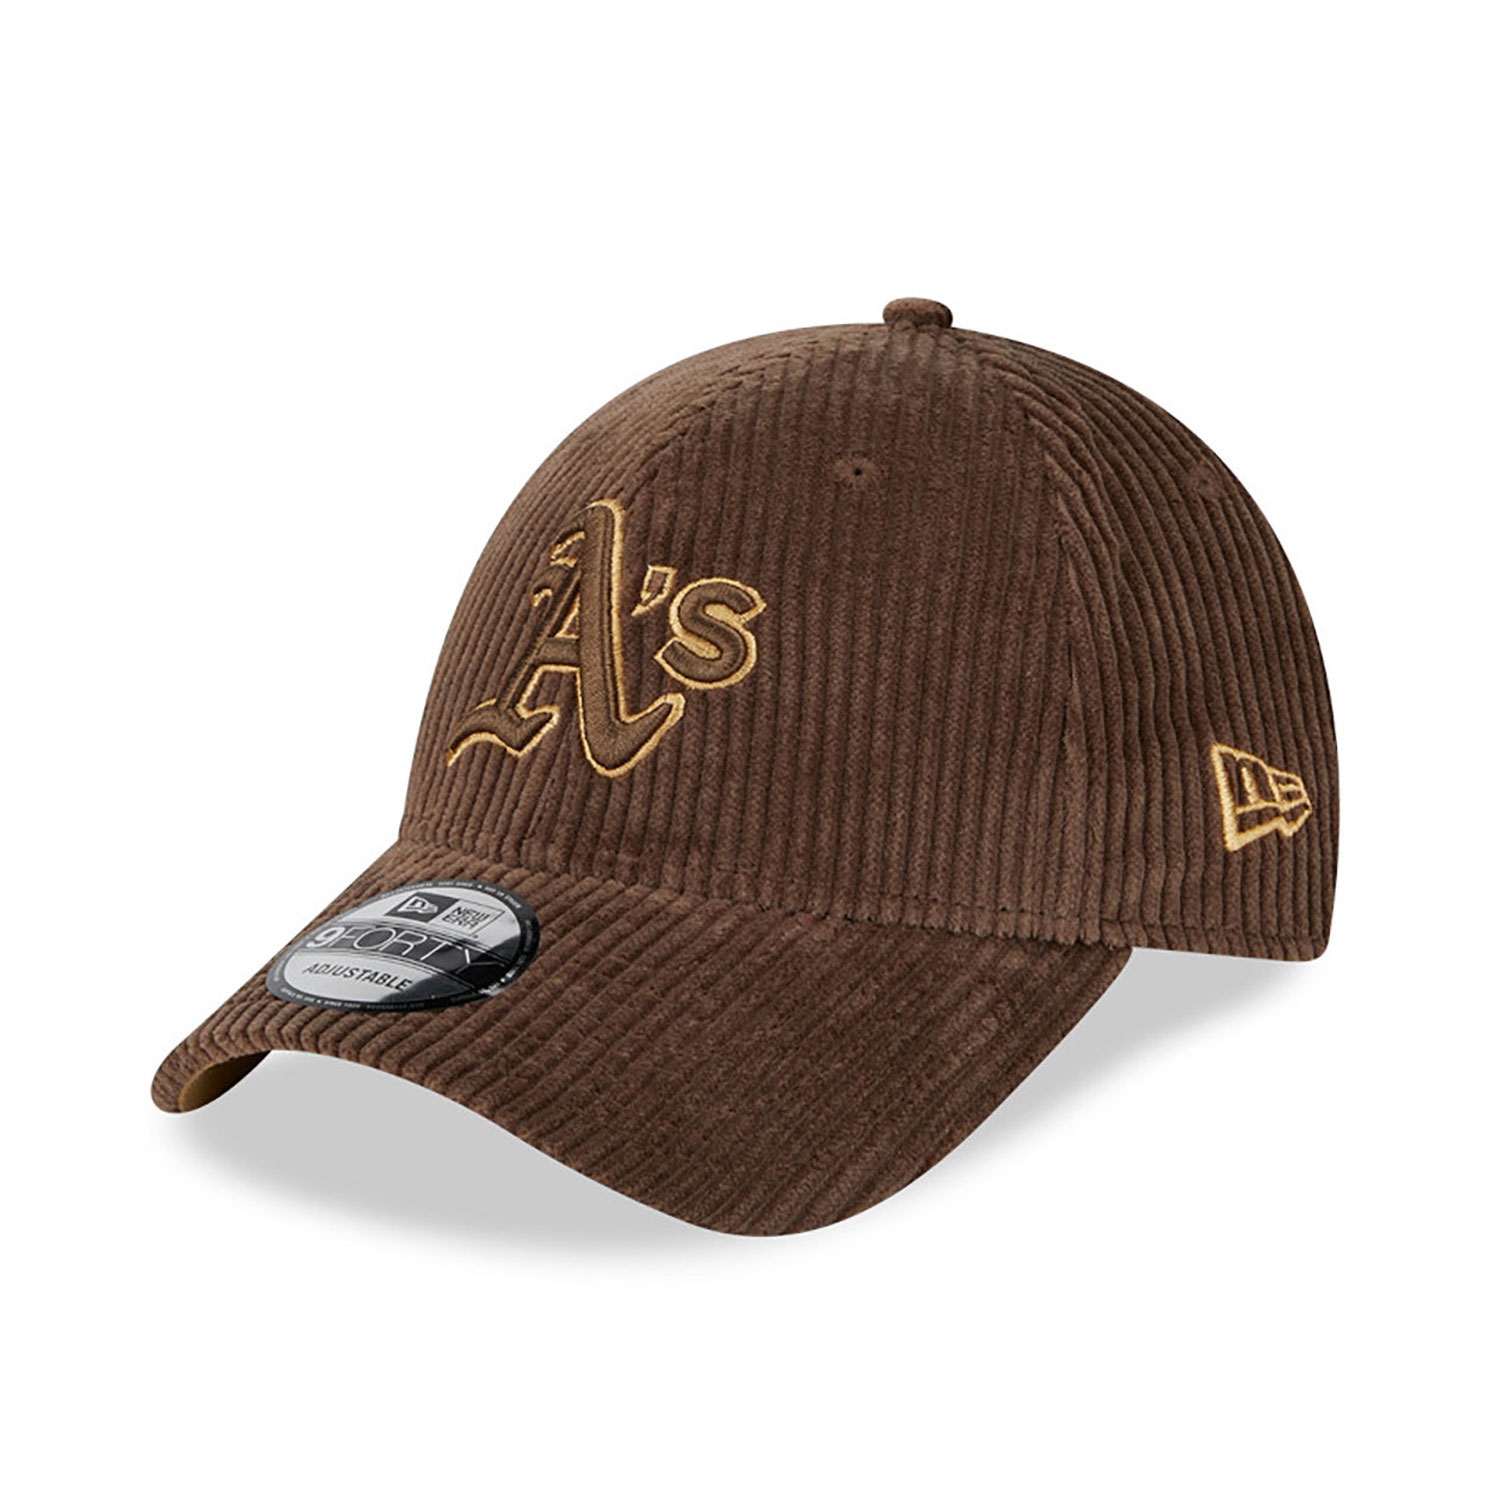 Oakland Athletics Wide Cord Brown 9FORTY Adjustable Cap